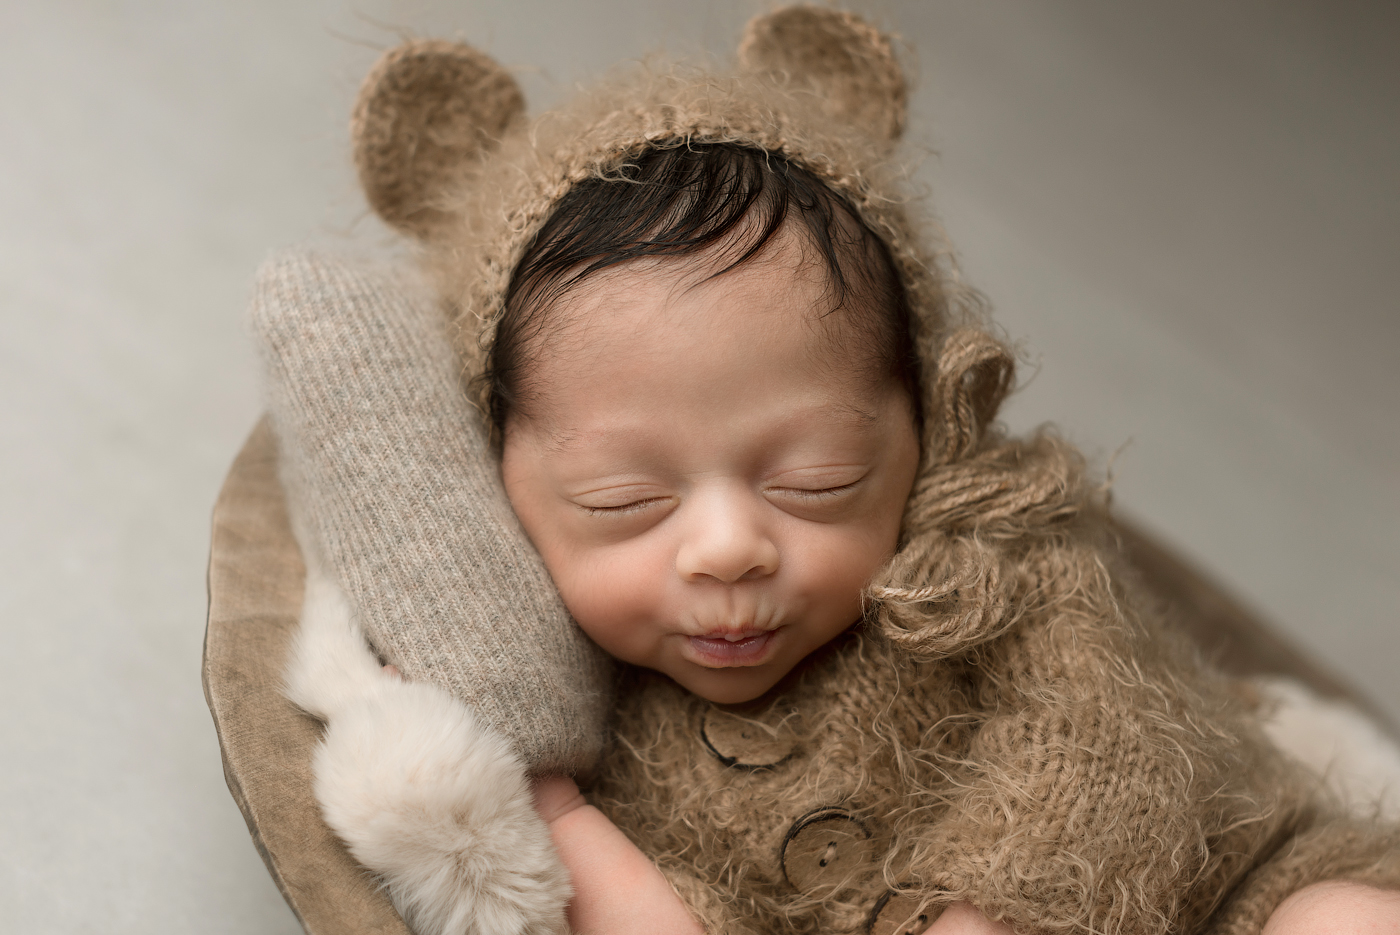 Affordable Newborn Photo Shoot in South Florida